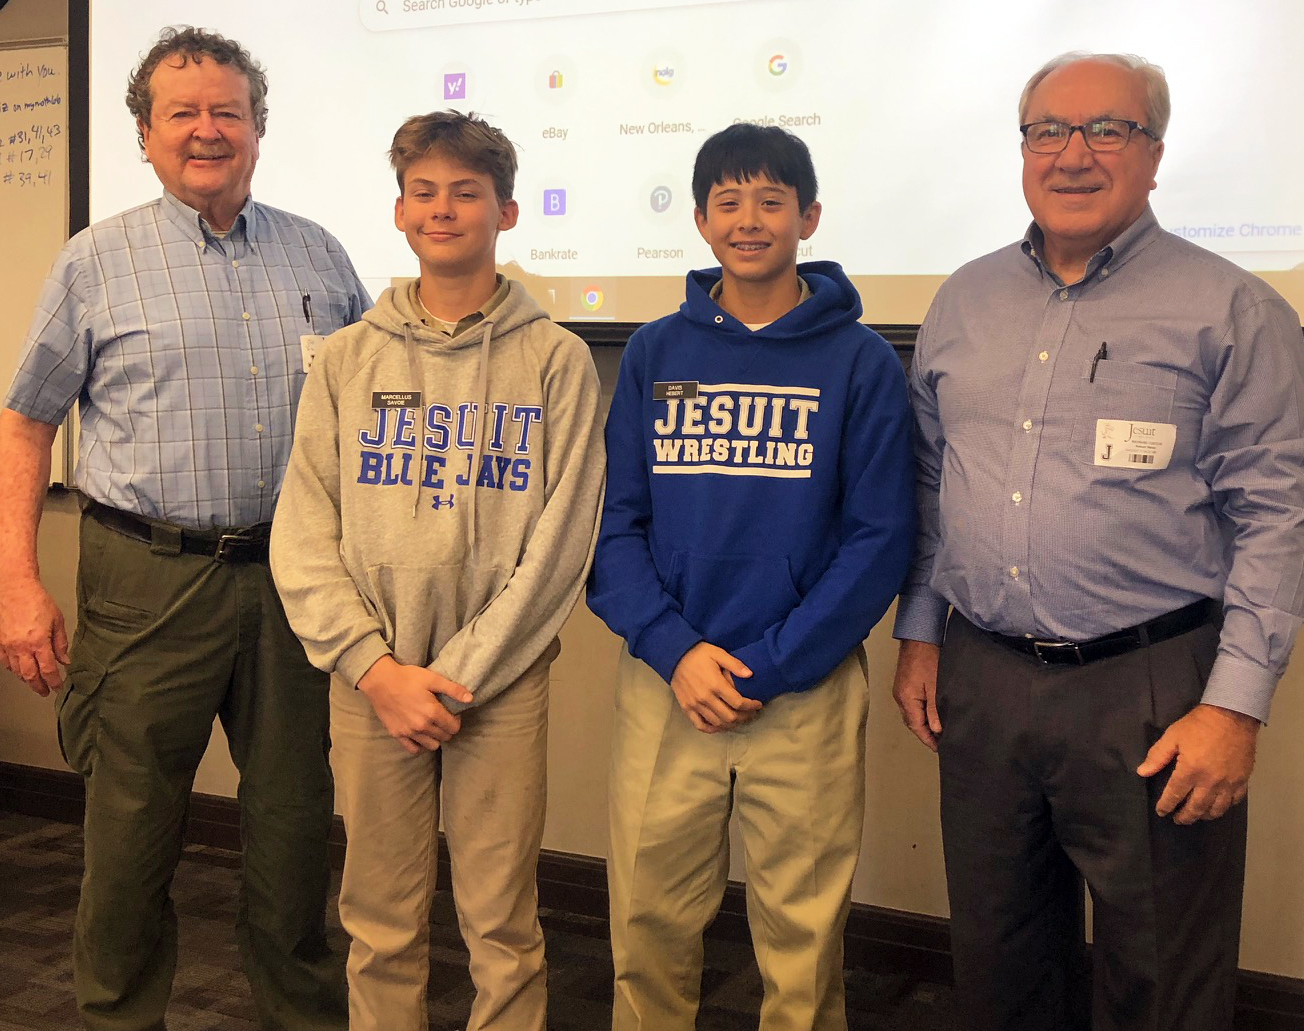 From left to right, Richard Dempsey, Marcellus Savoie, Davis Hebert, and Richard Cuicchi are pictured in May 2023. Savoie and Hebert are students at Jesuit High School in New Orleans who received scholarship awards in a baseball essay contest established by the local SABR chapter.